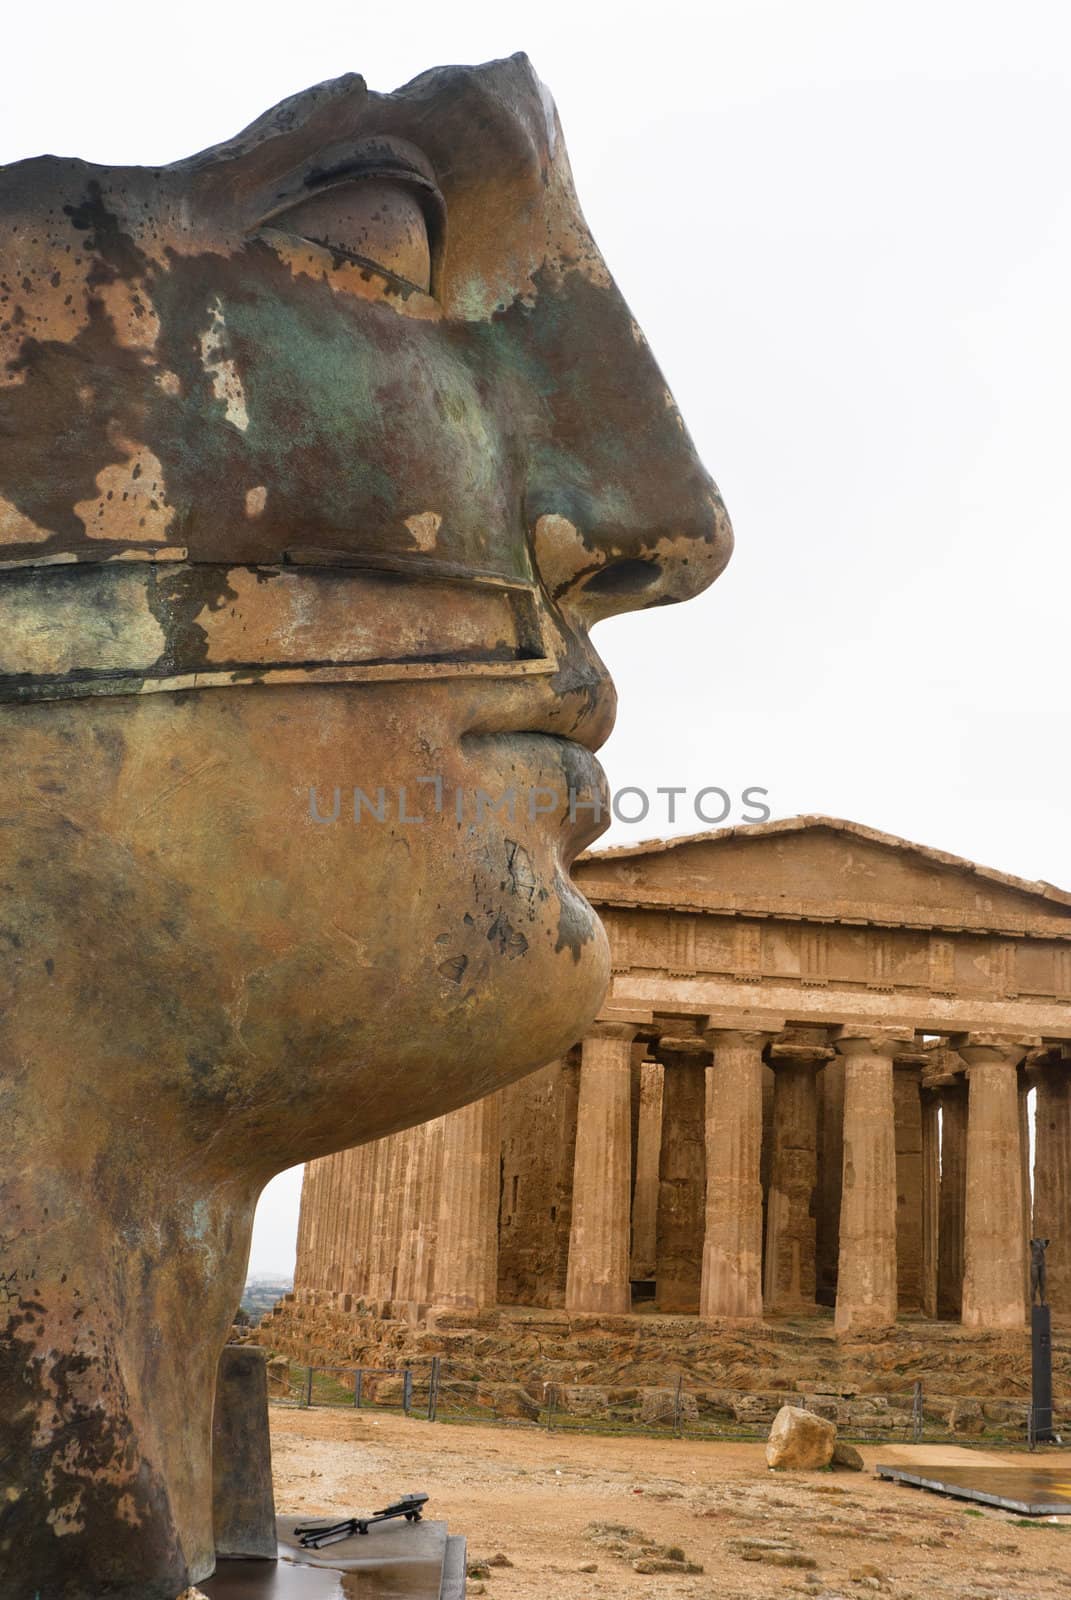 Valley of the Temples, Agrigento, Sicily, Italy.